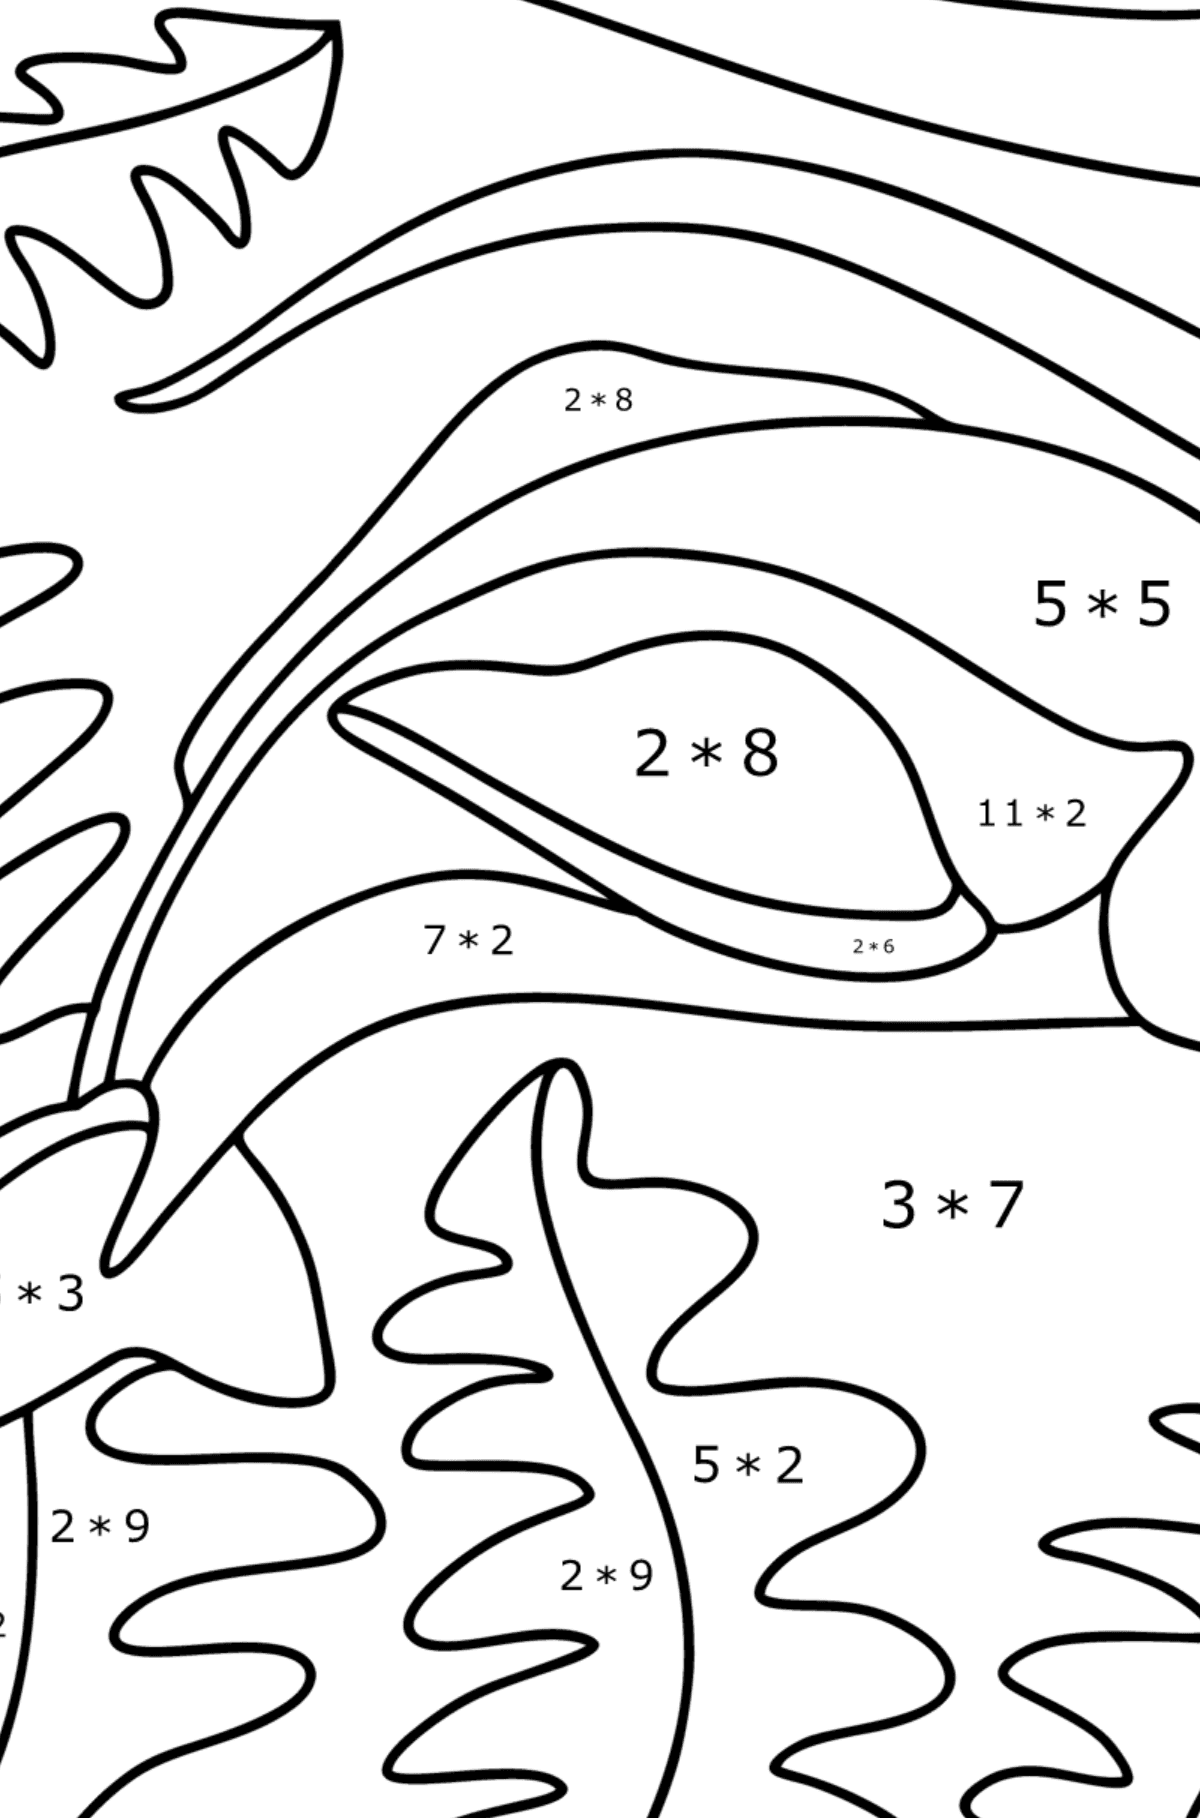 Chinese River Dolphin coloring page - Math Coloring - Multiplication for Kids